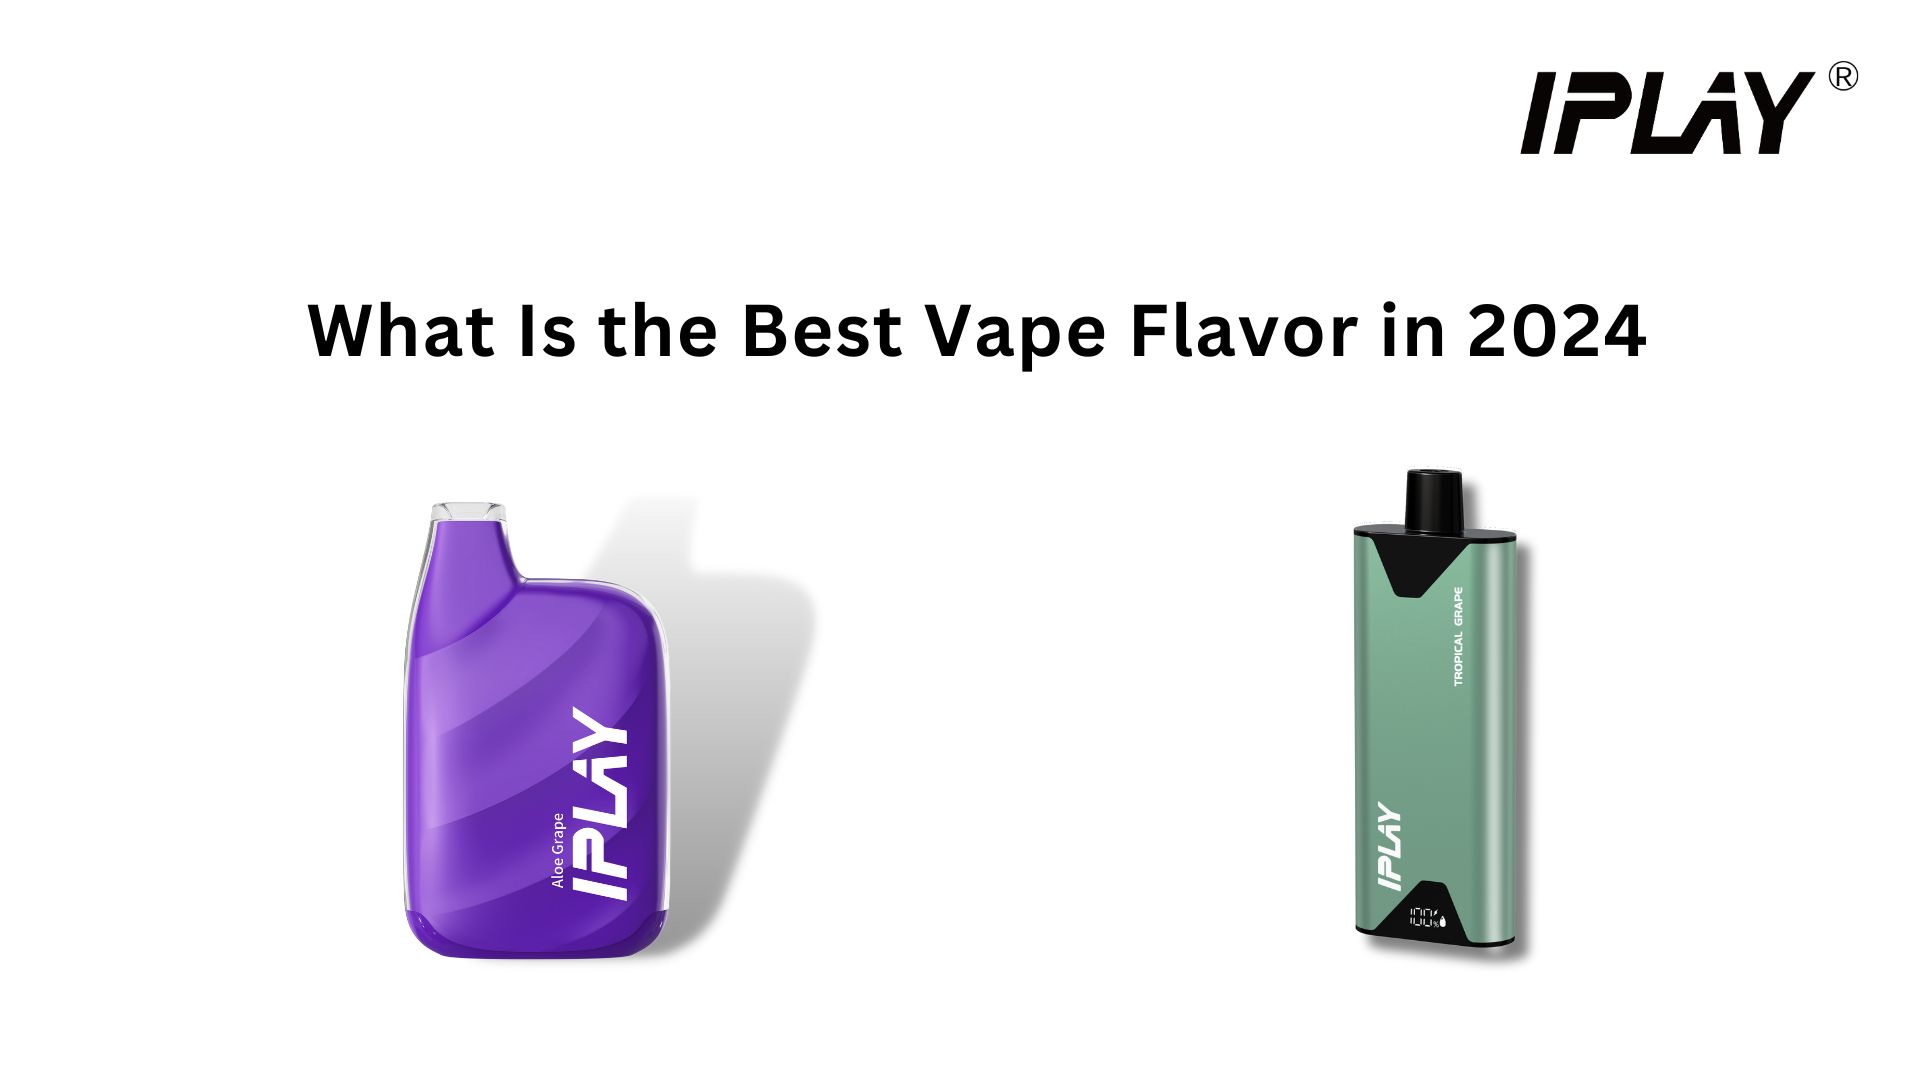 What Is the Best Vape Flavor in 2024